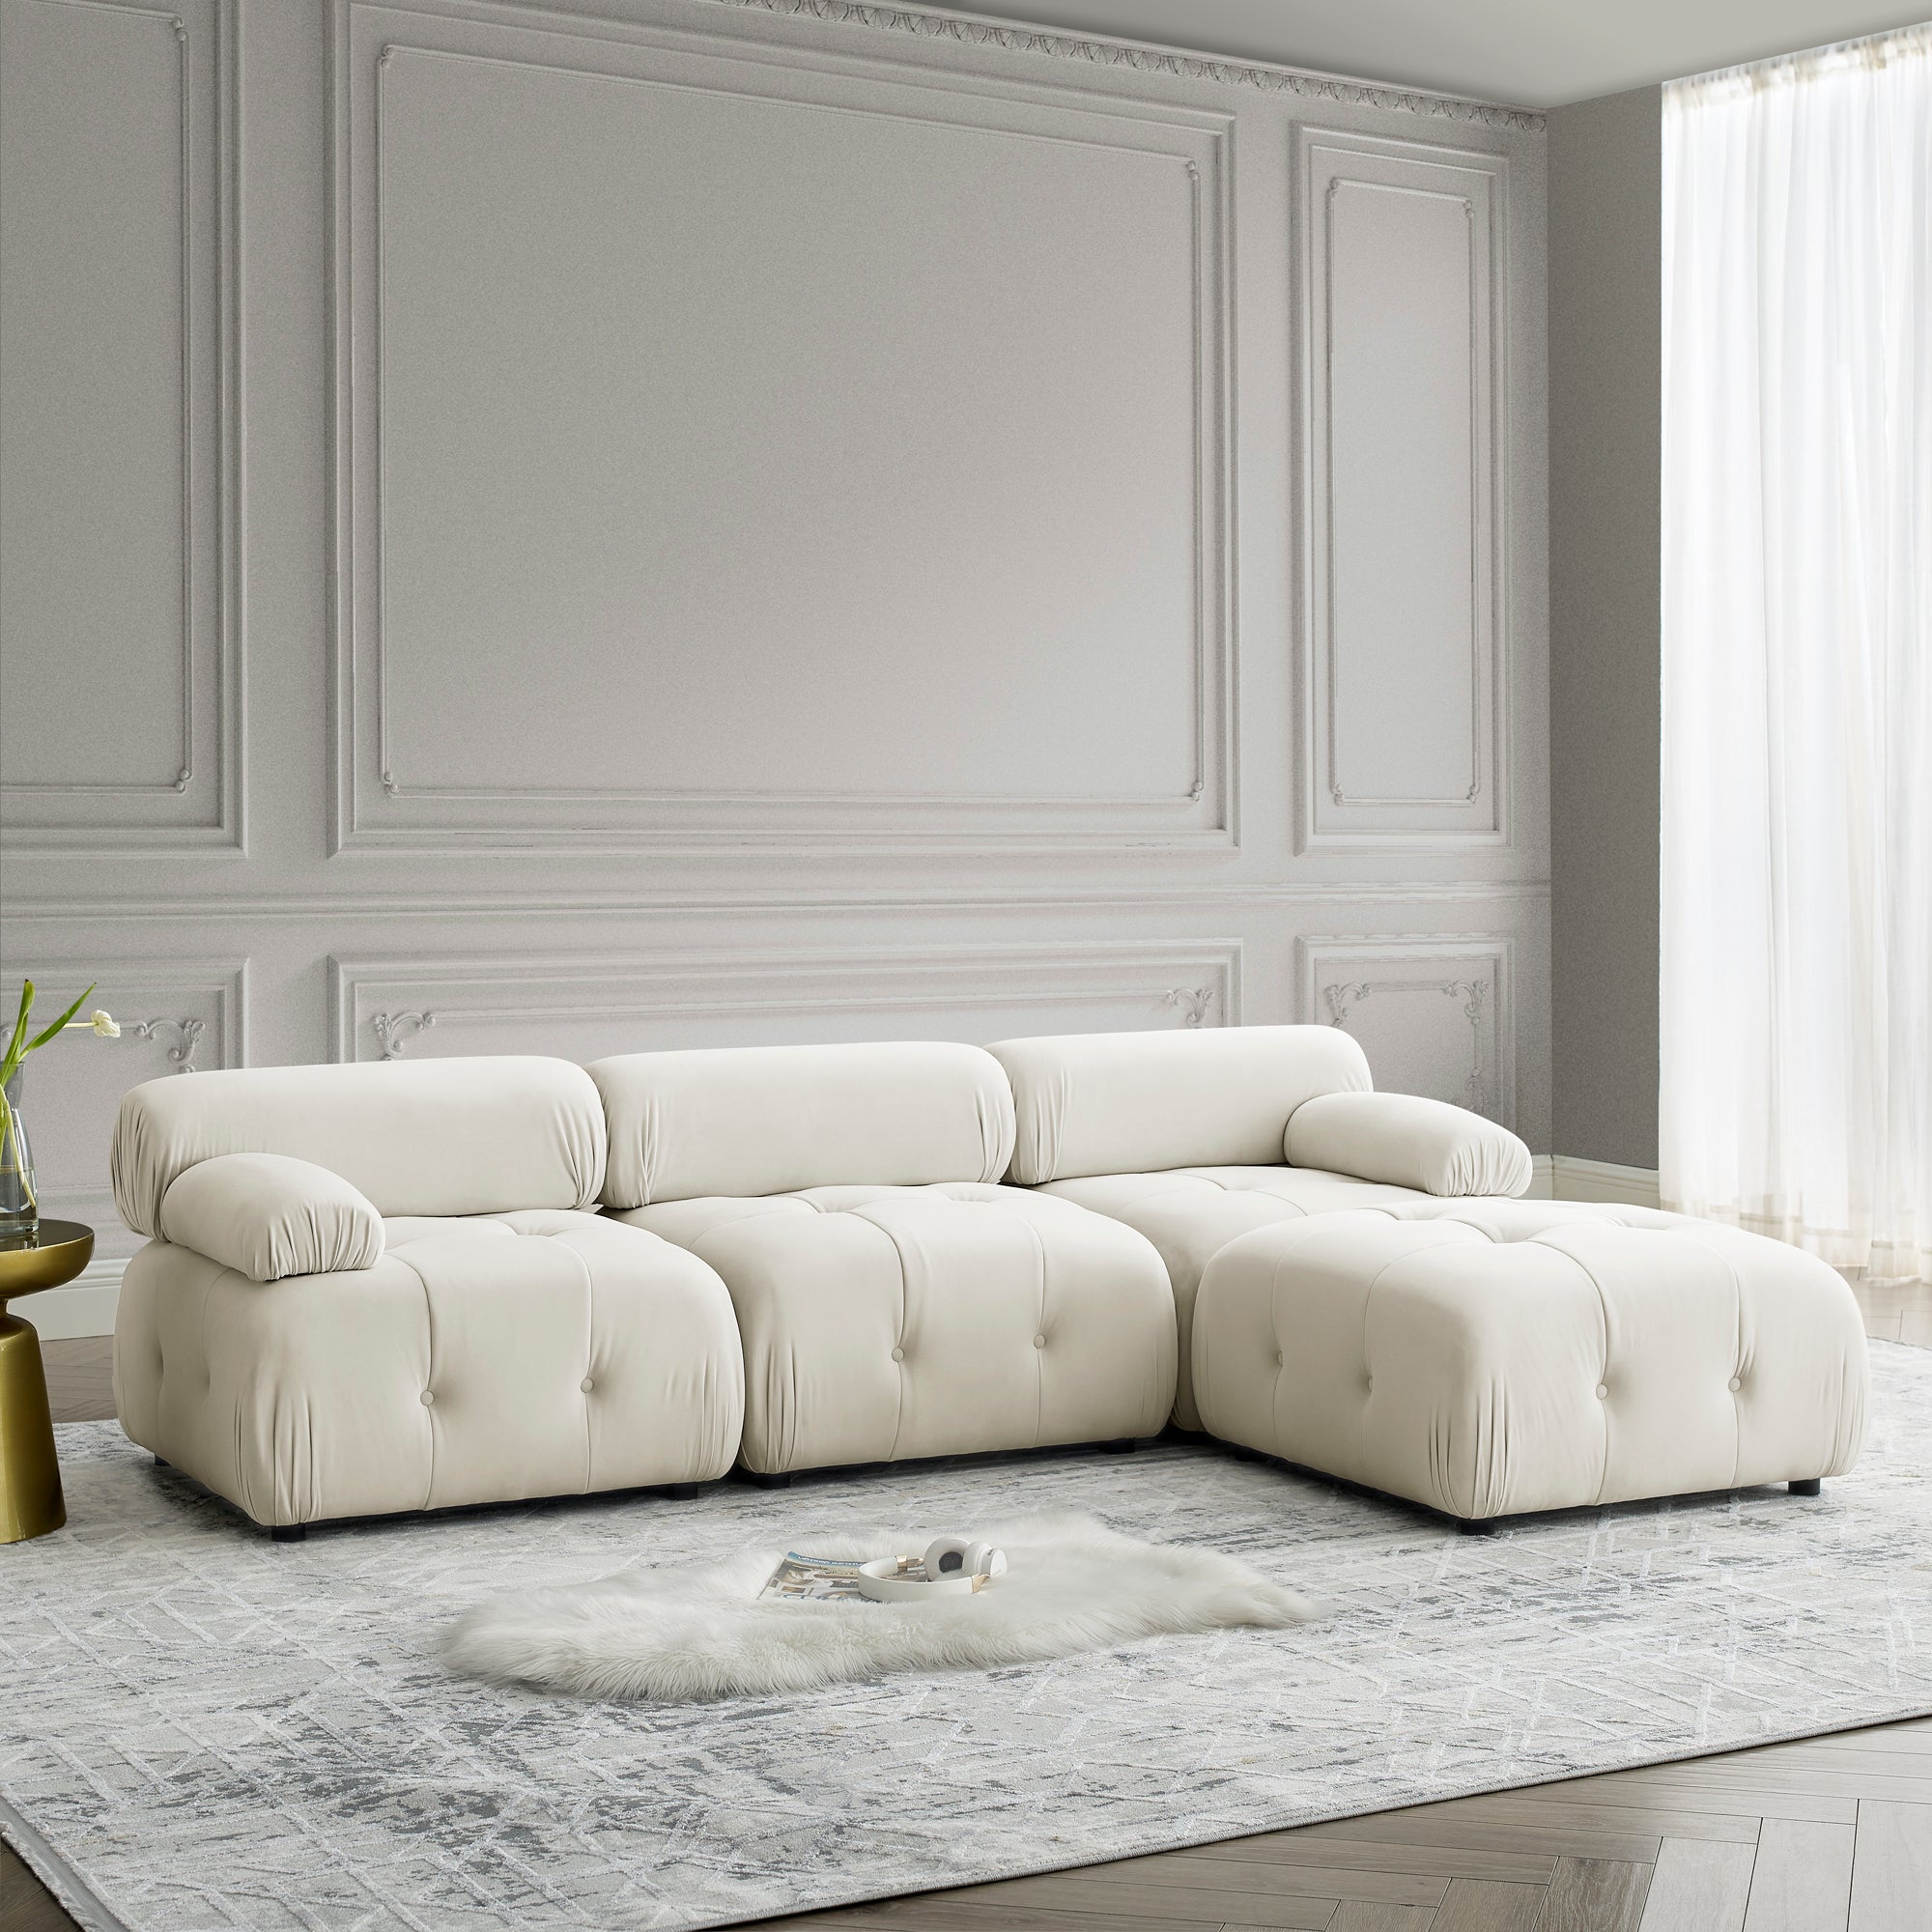 Modular Sectional Sofa, Button Tufted Designed and DIY Combination,L Shaped Couch with Reversible Ottoman - Beige Velvet